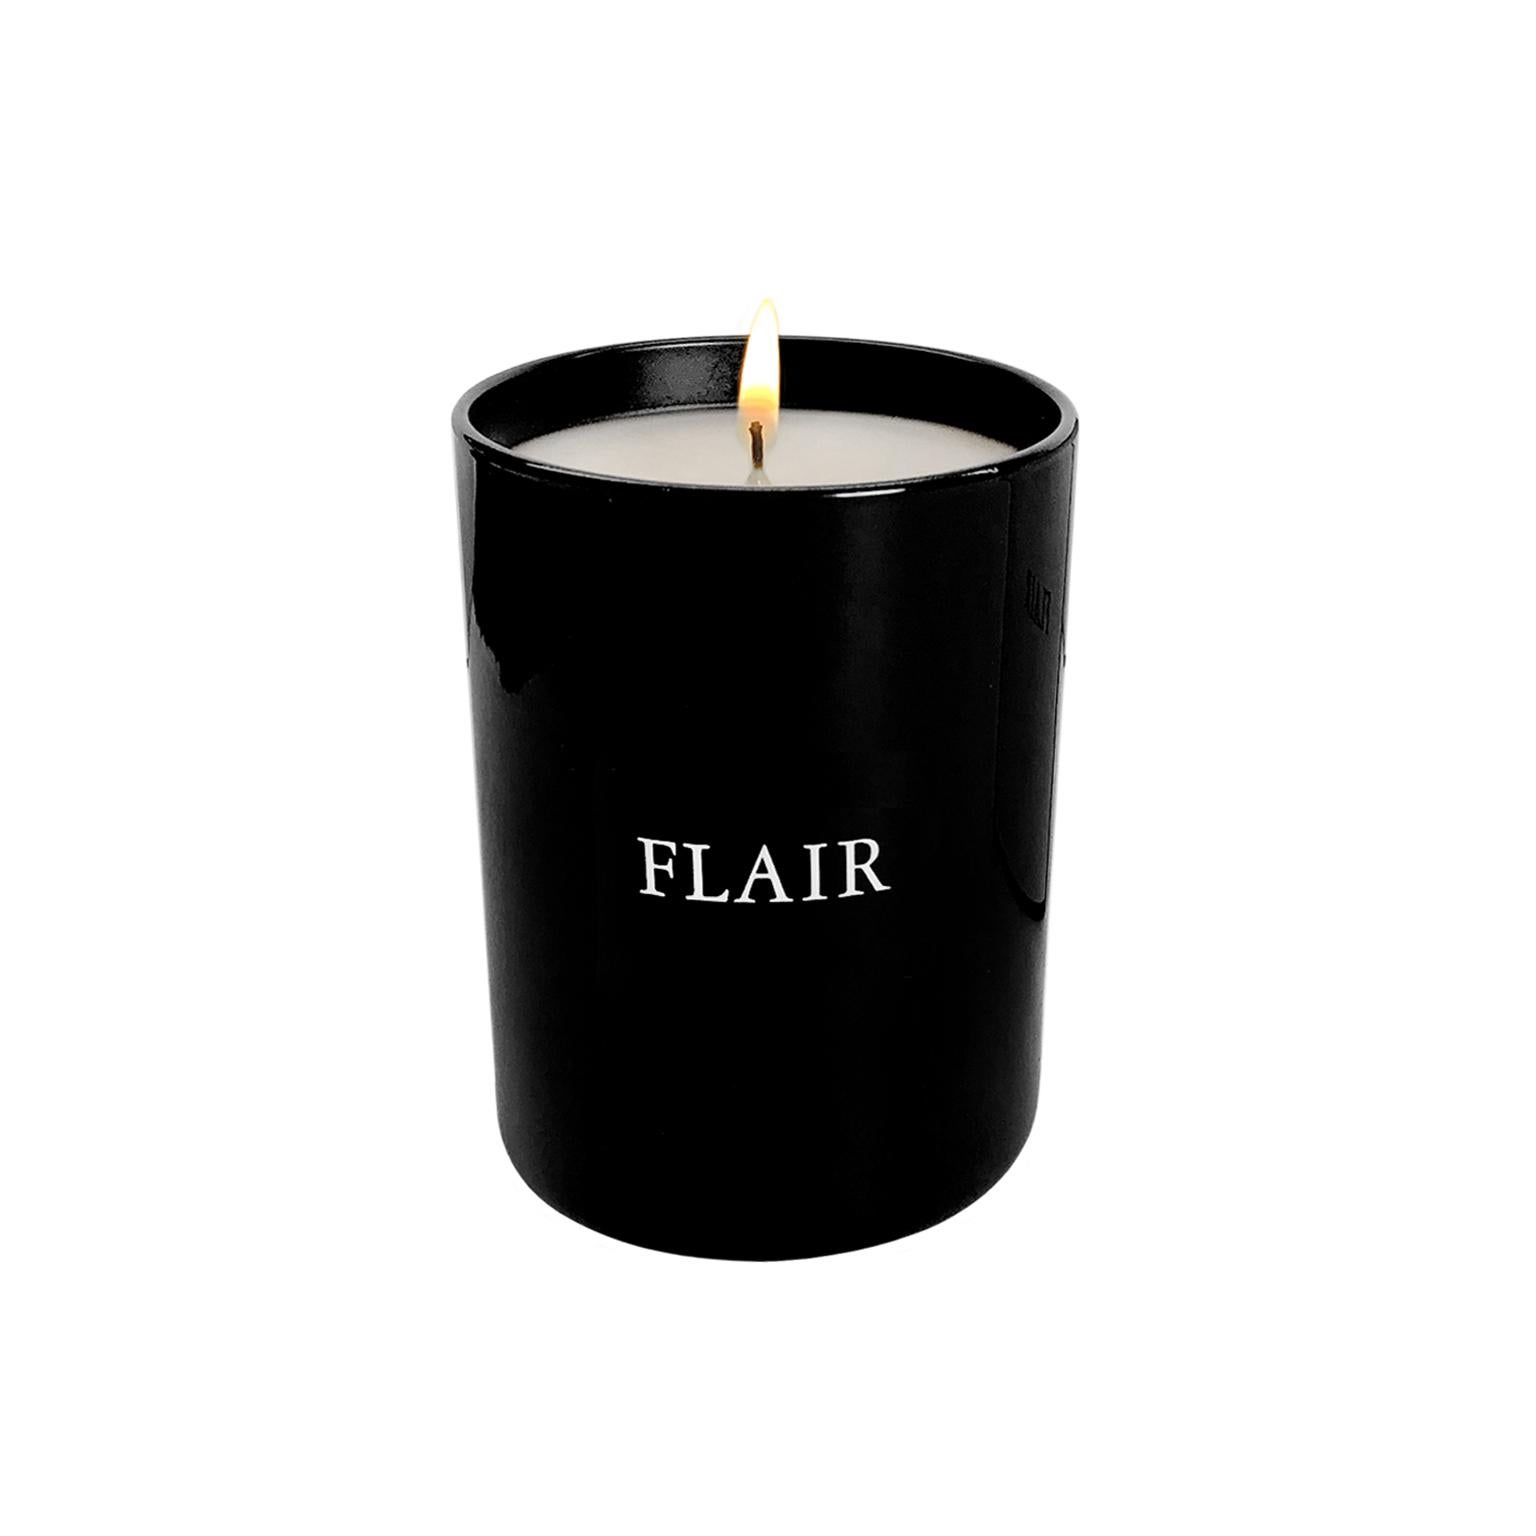 FLAIR Home collection candle in classic dark amber. Deep and mysterious, featuring a base scent of dark amber enhanced with notes of precious wood, tobacco, caramel and oak moss. Black glass 6.5 oz container. Made in France.